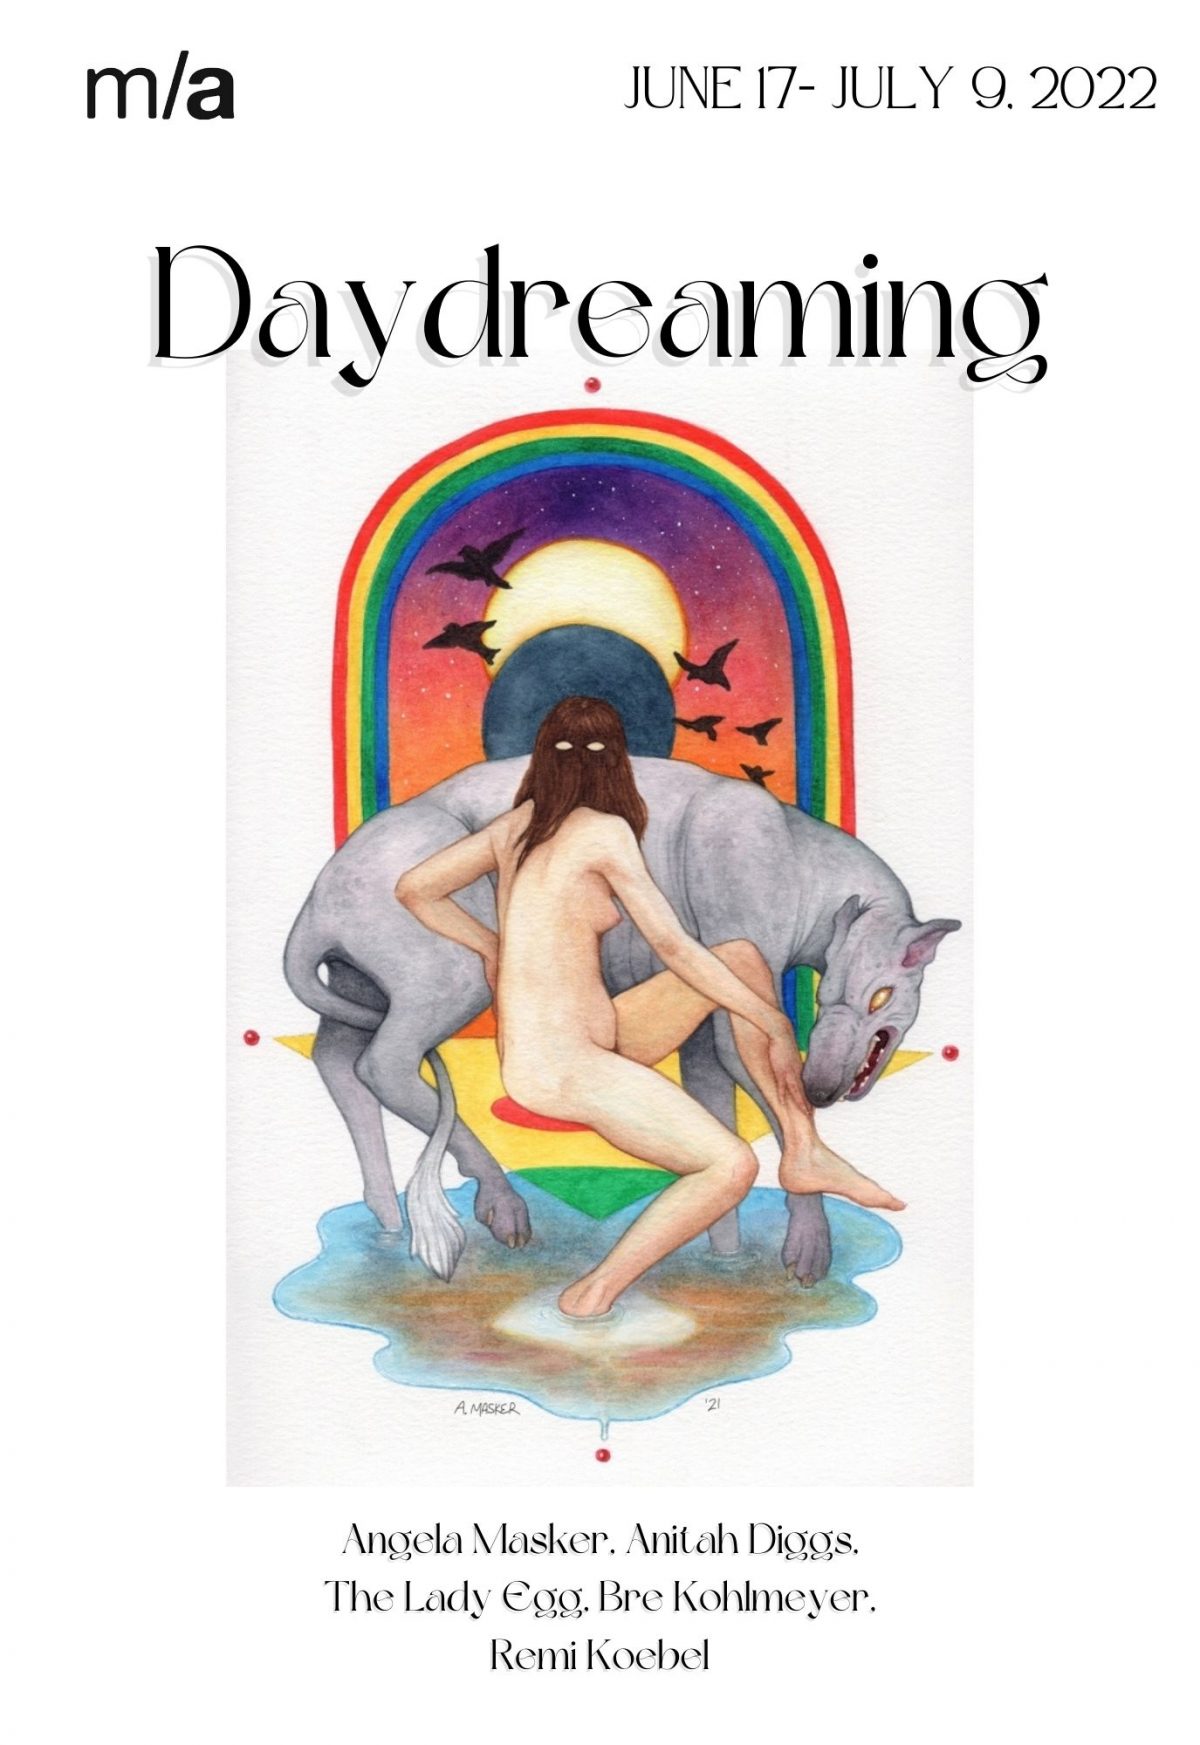 Daydreaming flyer with opening June 17 and closing July 1